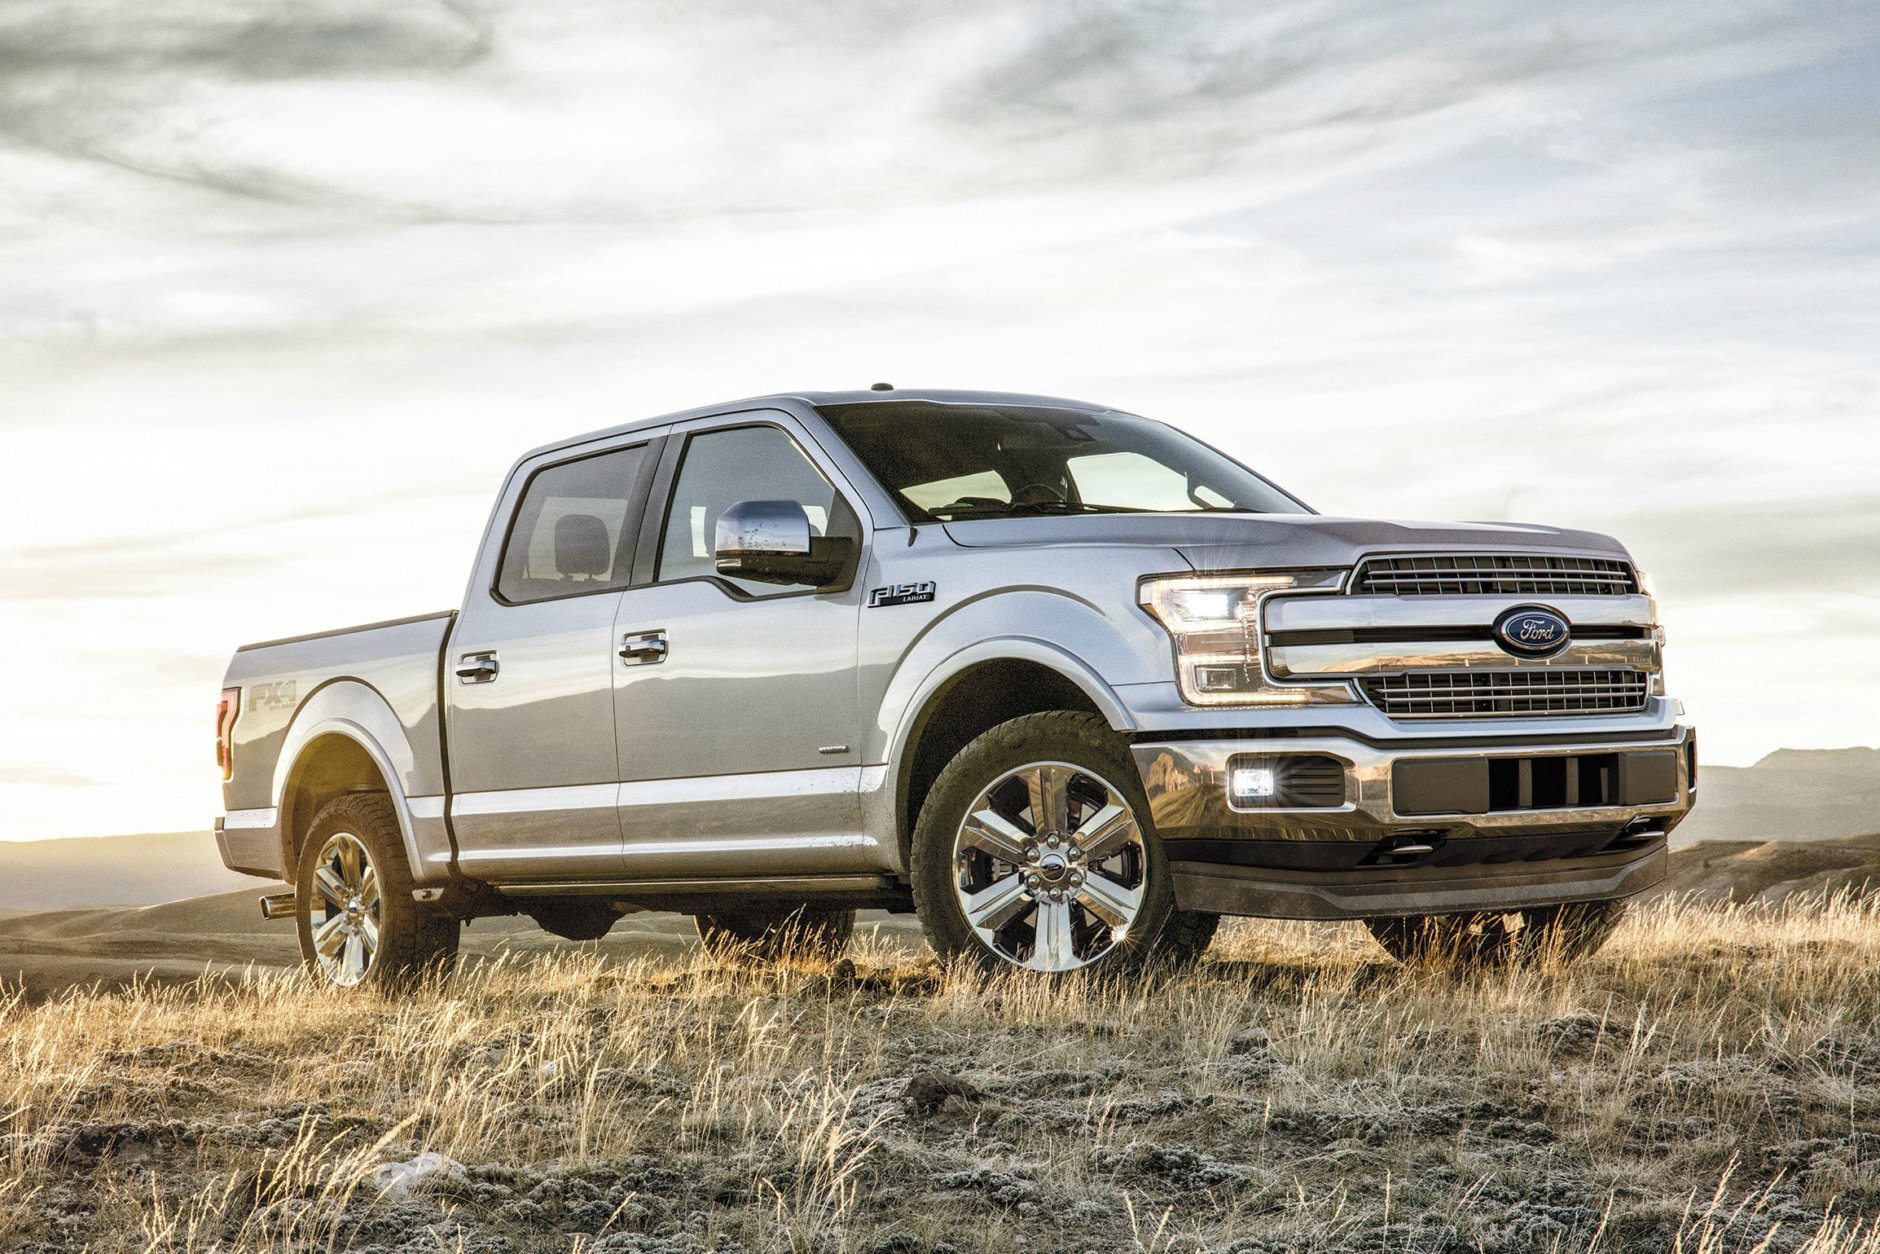 2019 Ford F-150
Purchase Deal: 0% financing for 72 months
(Courtesy Ford Motor Company)